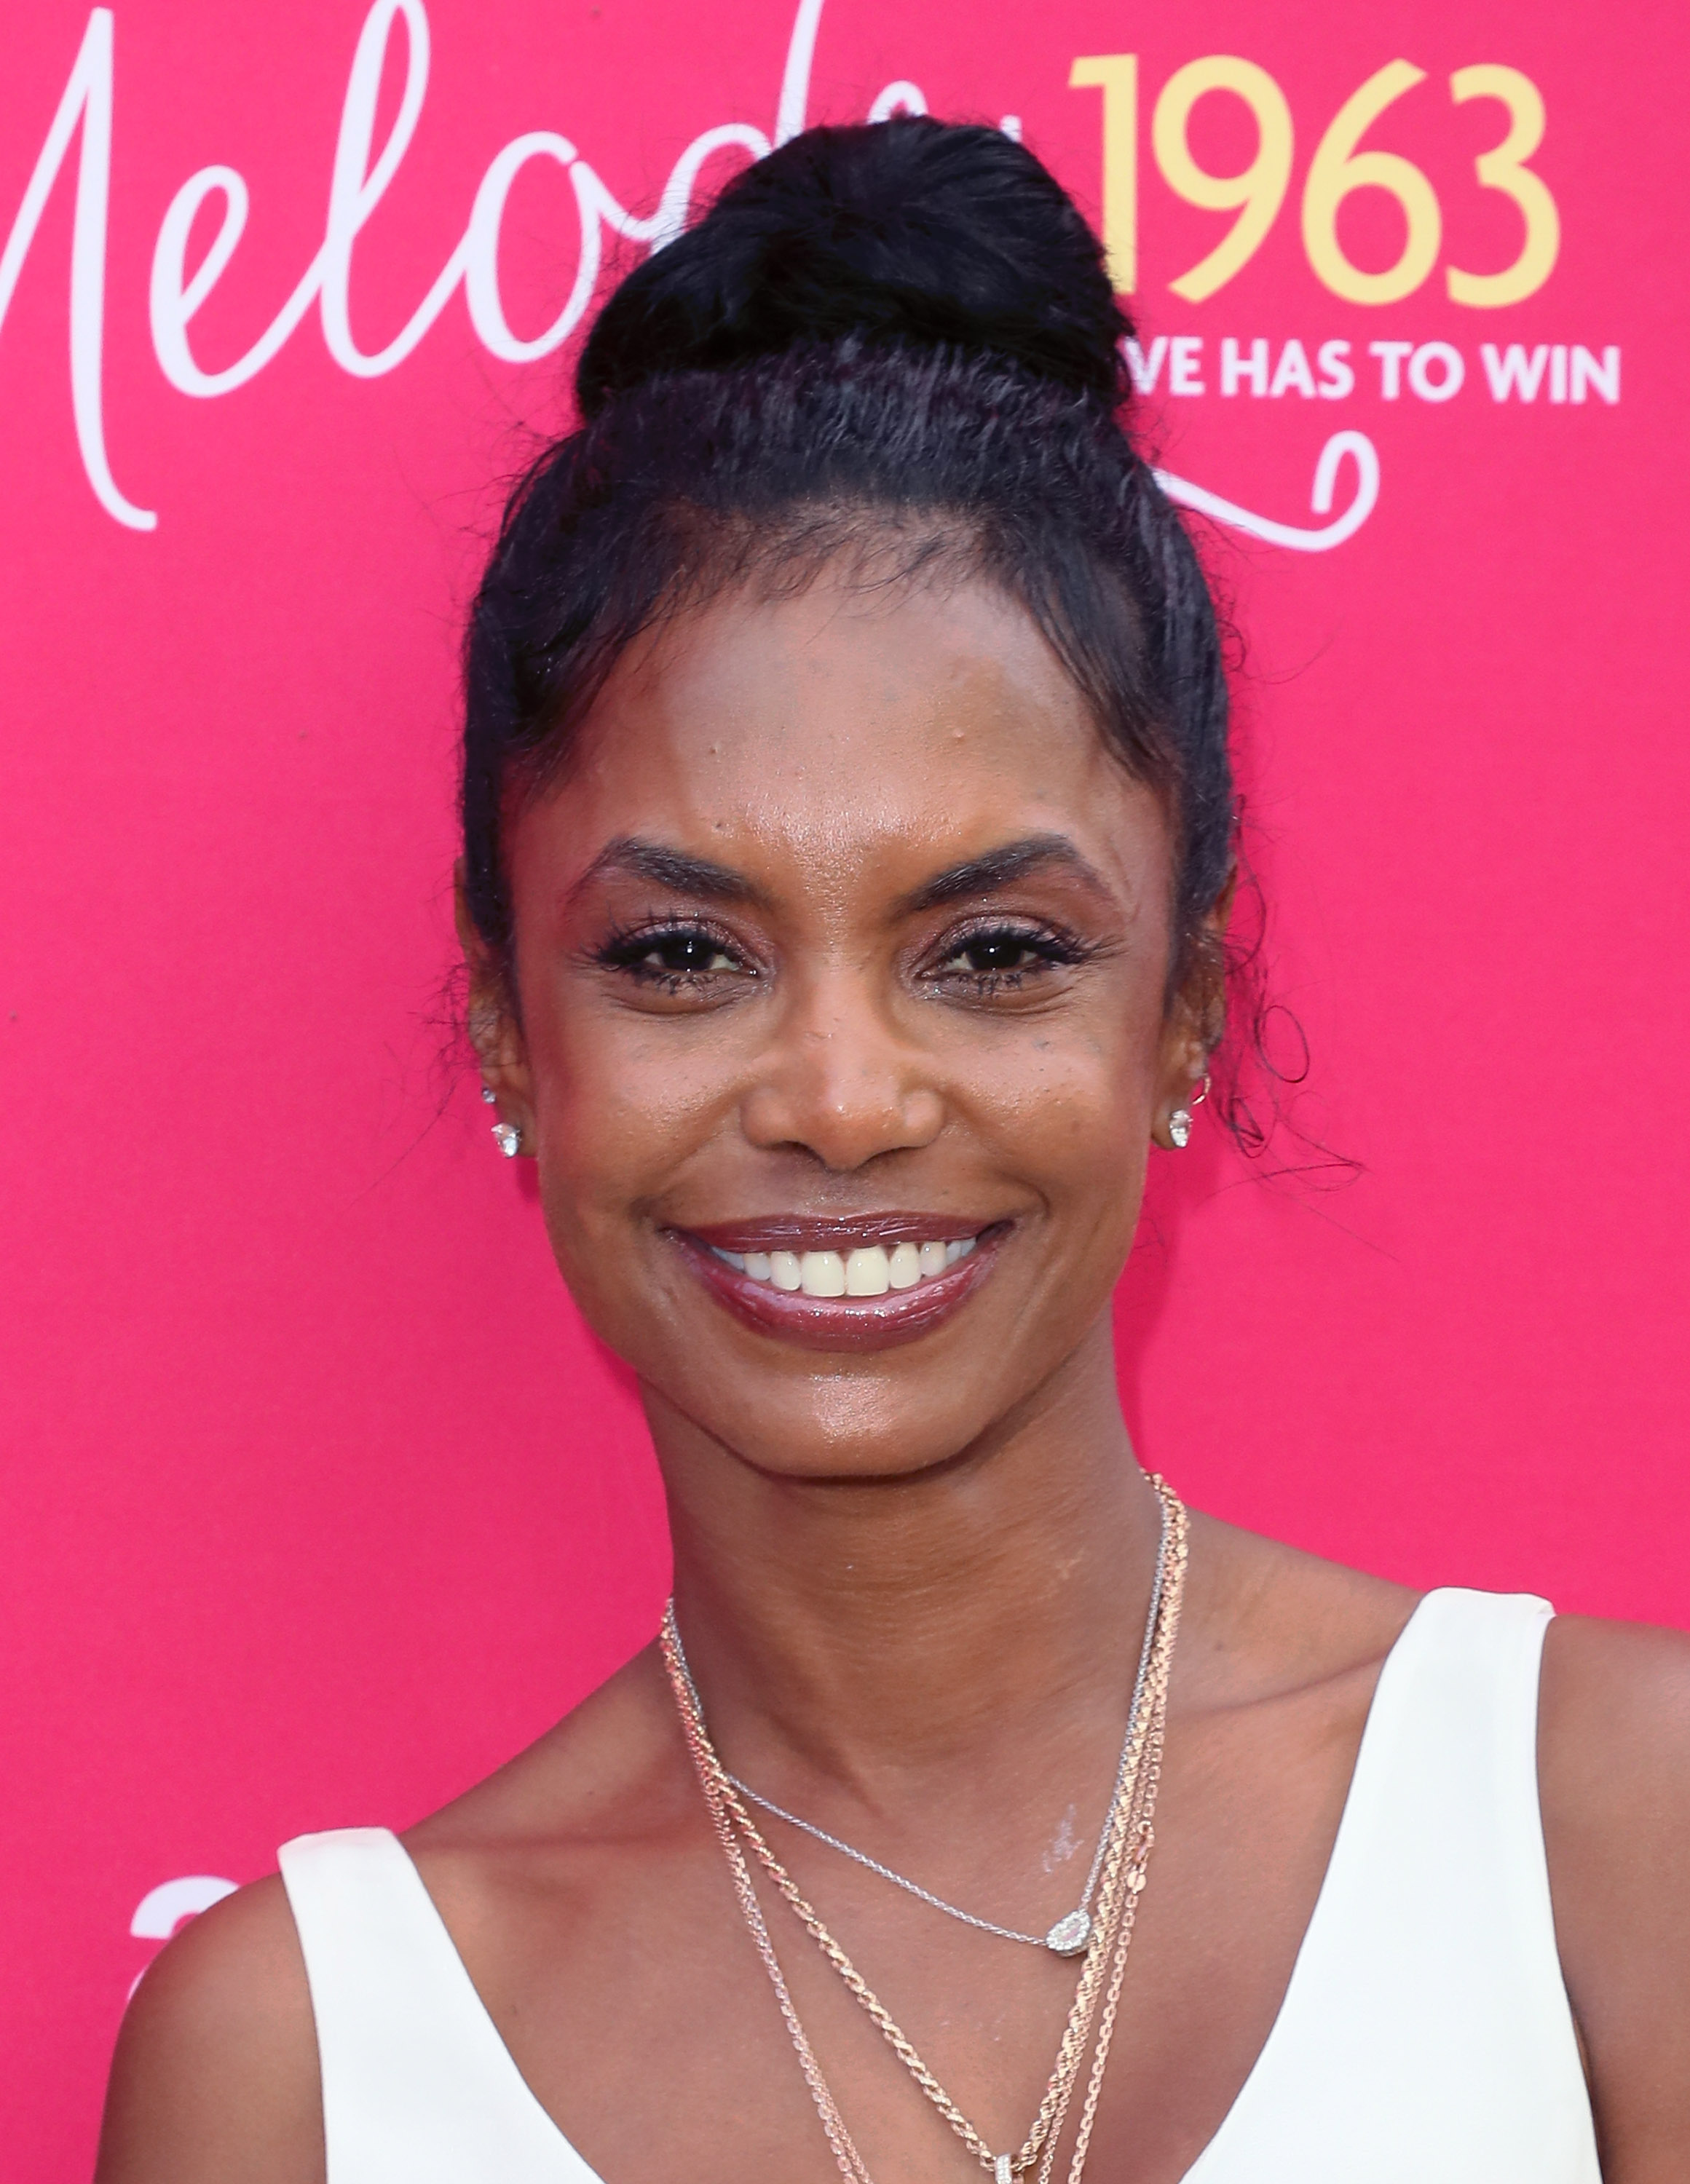 Kim Porter attends the premiere of "An American Girl Story - Melody 1963: Love Has to Win," 2016 | Source: Getty Images